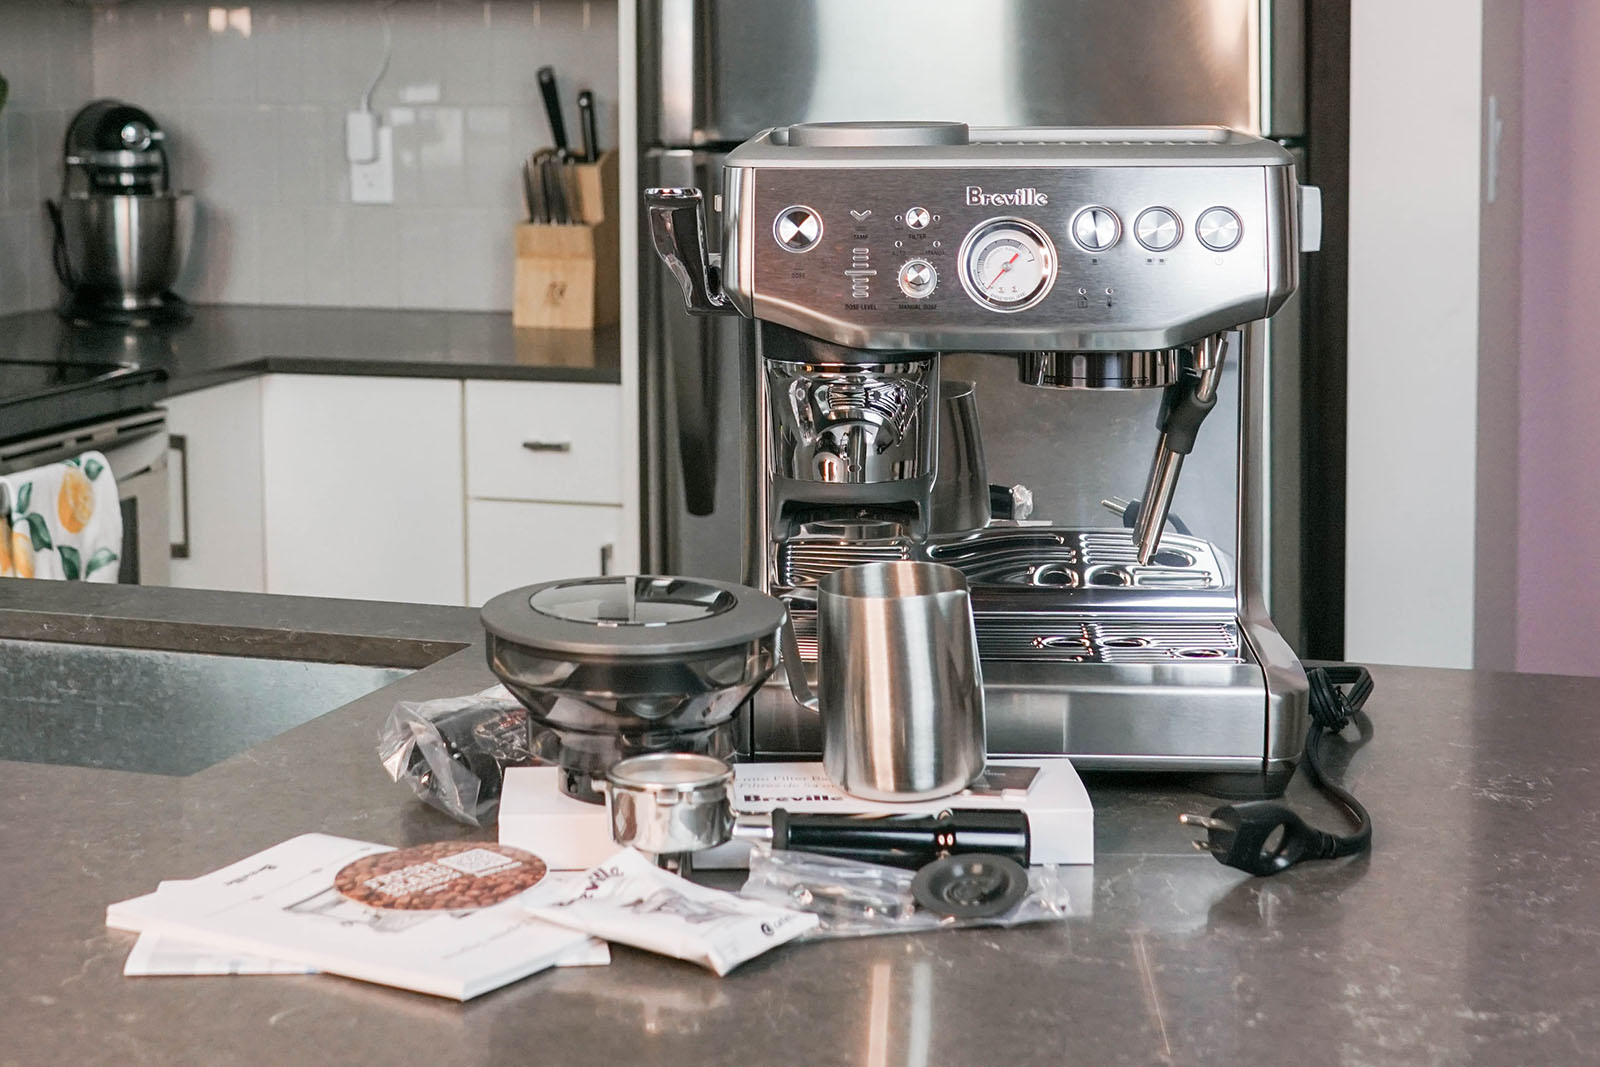 Breville Barista Express Impress review what's in the box